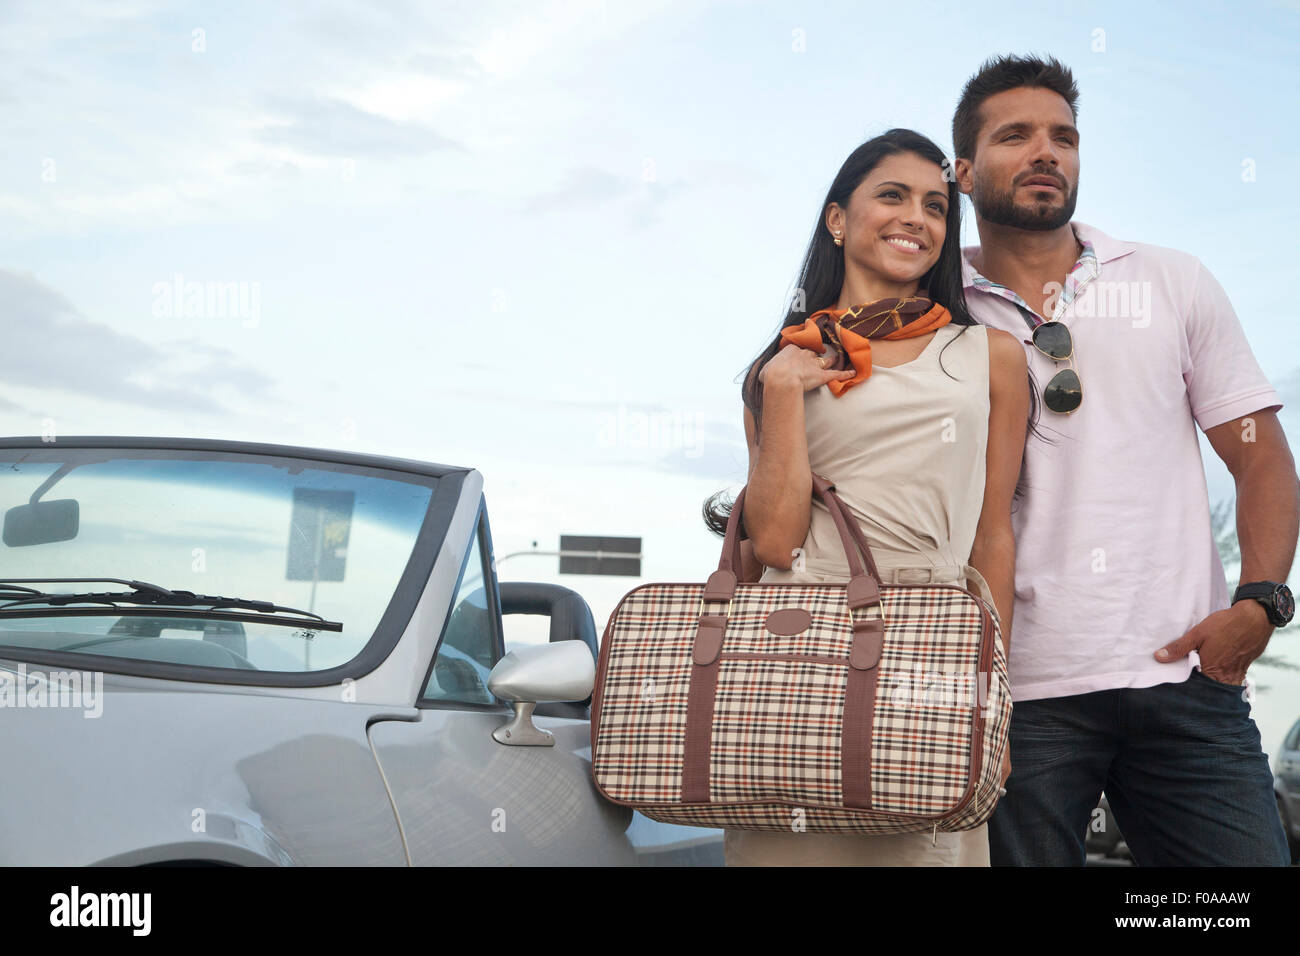 Portrait of mid adult couple standing by convertible car Stock Photo